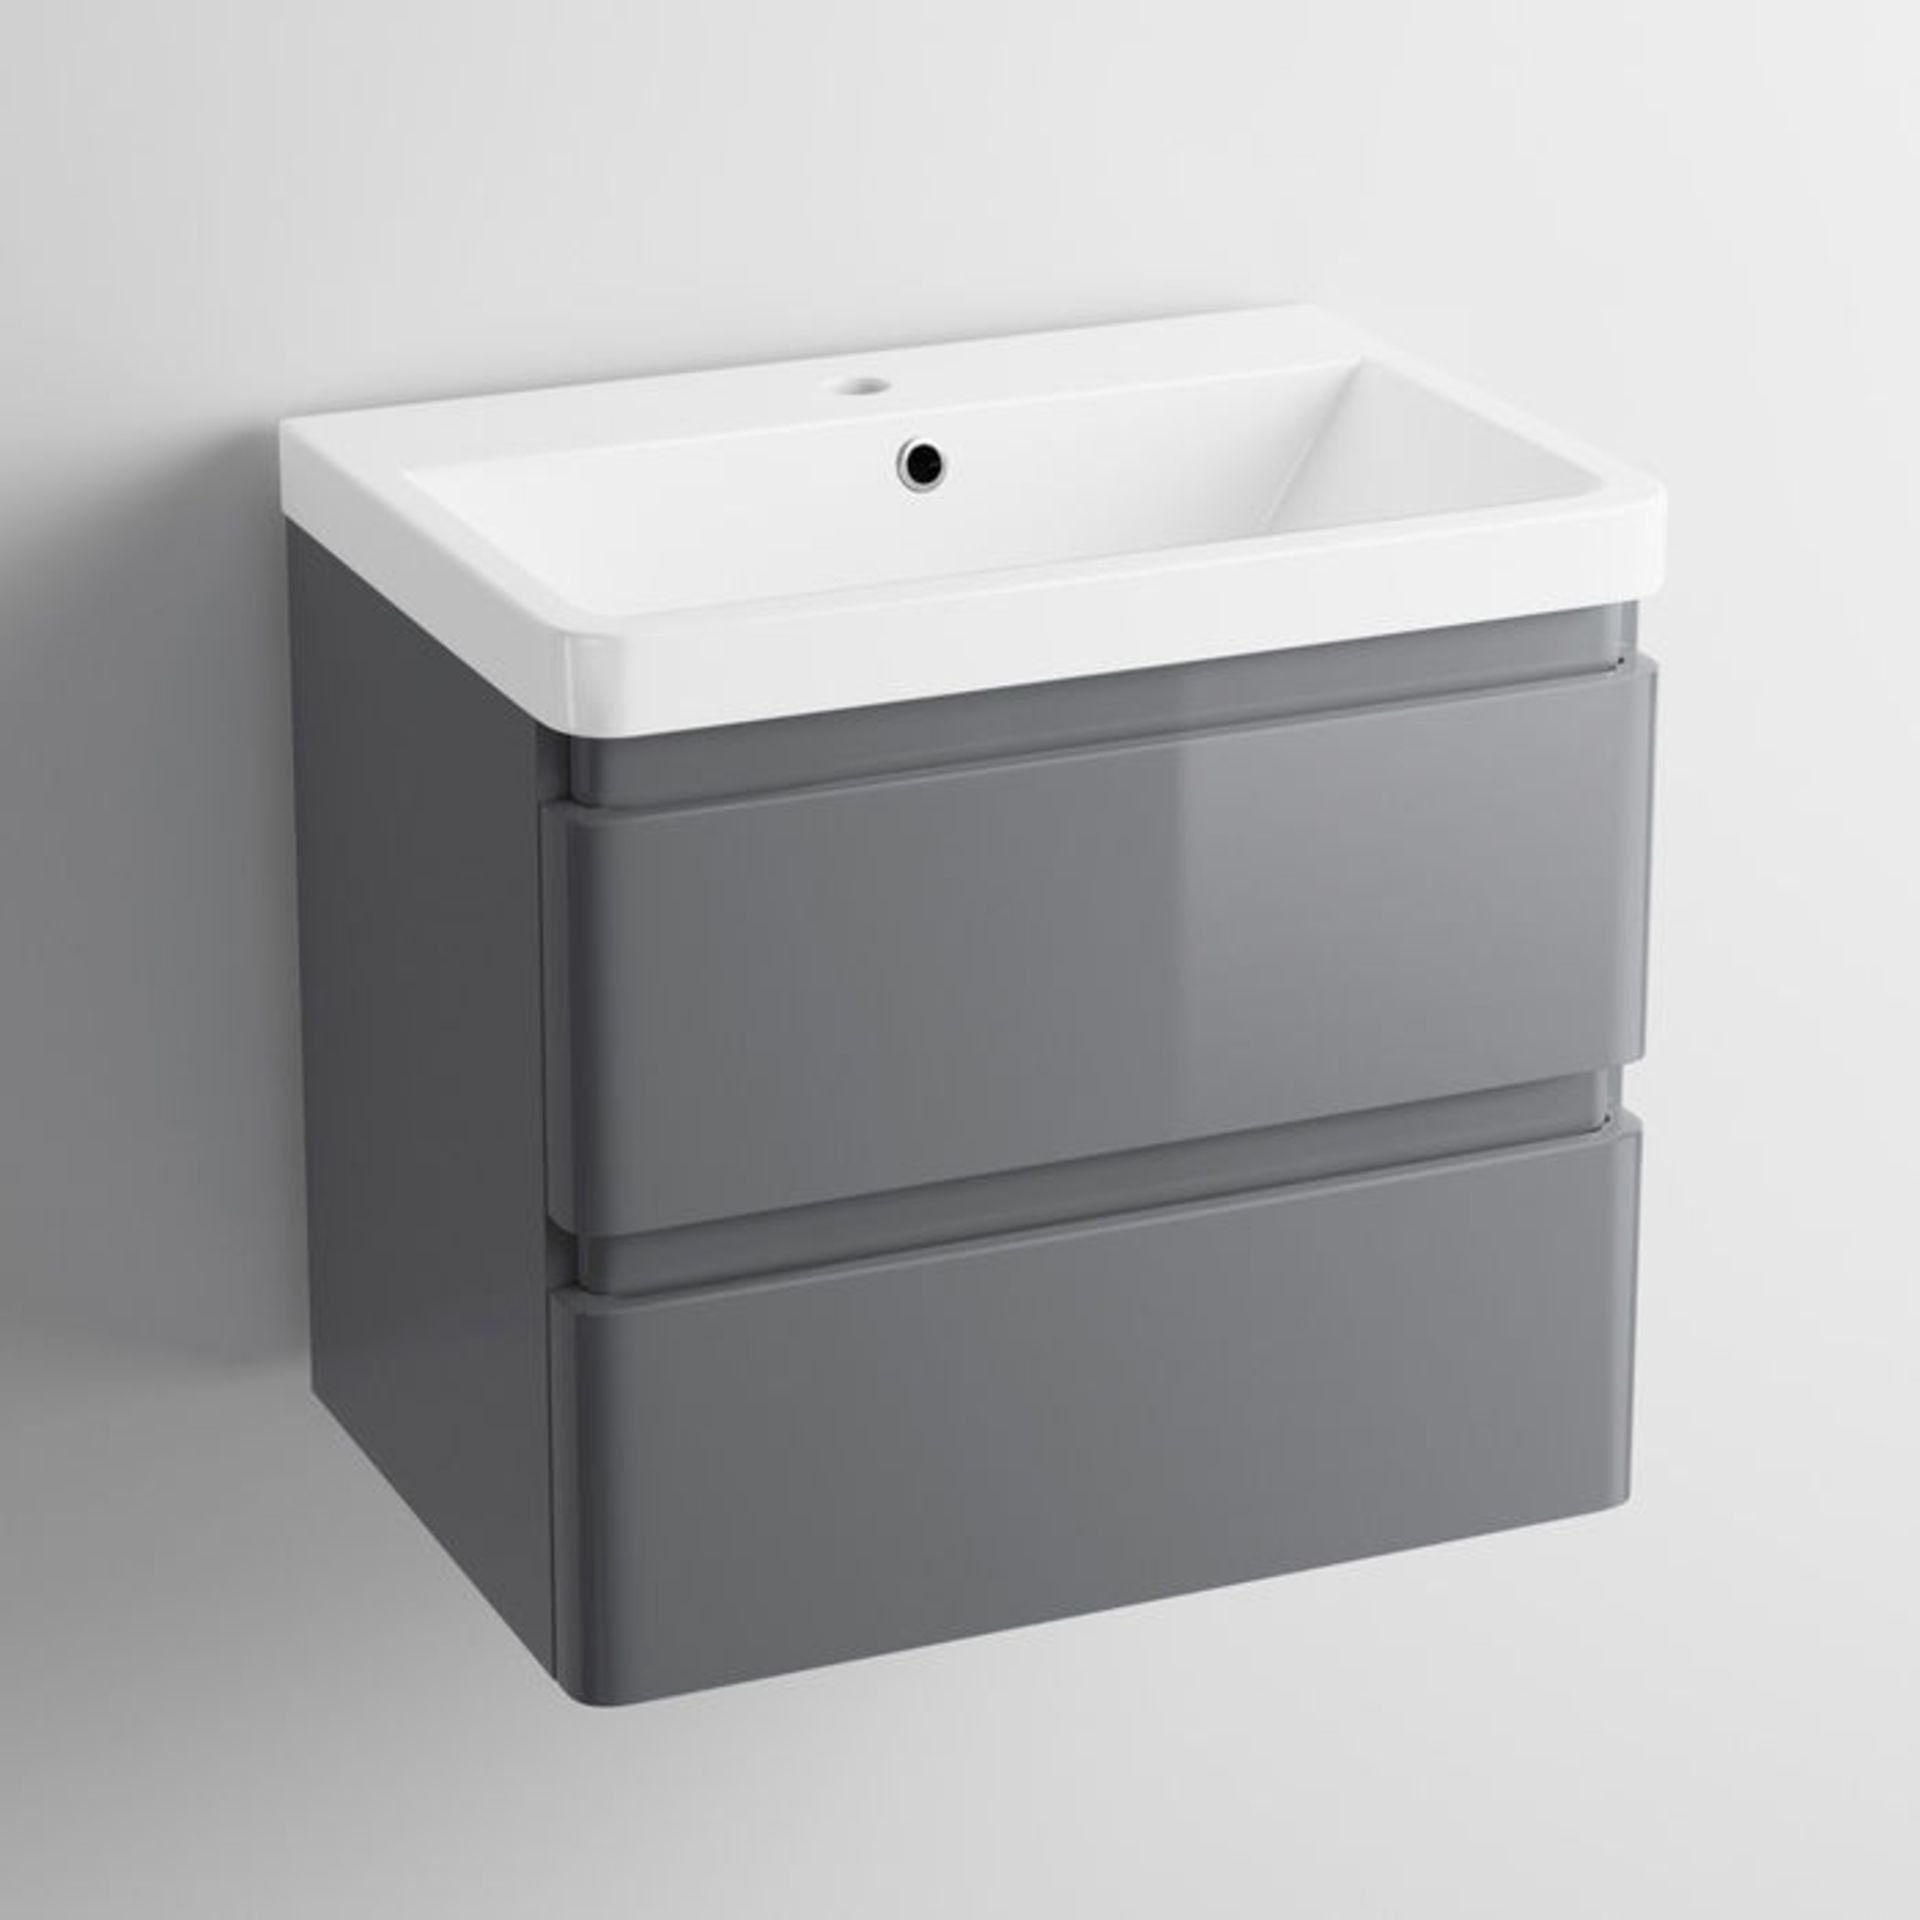 (CT51) 600mm Denver Gloss Grey Built In Basin Drawer Unit - Wall Hung. RRP £254.99. Comes complete - Image 3 of 4